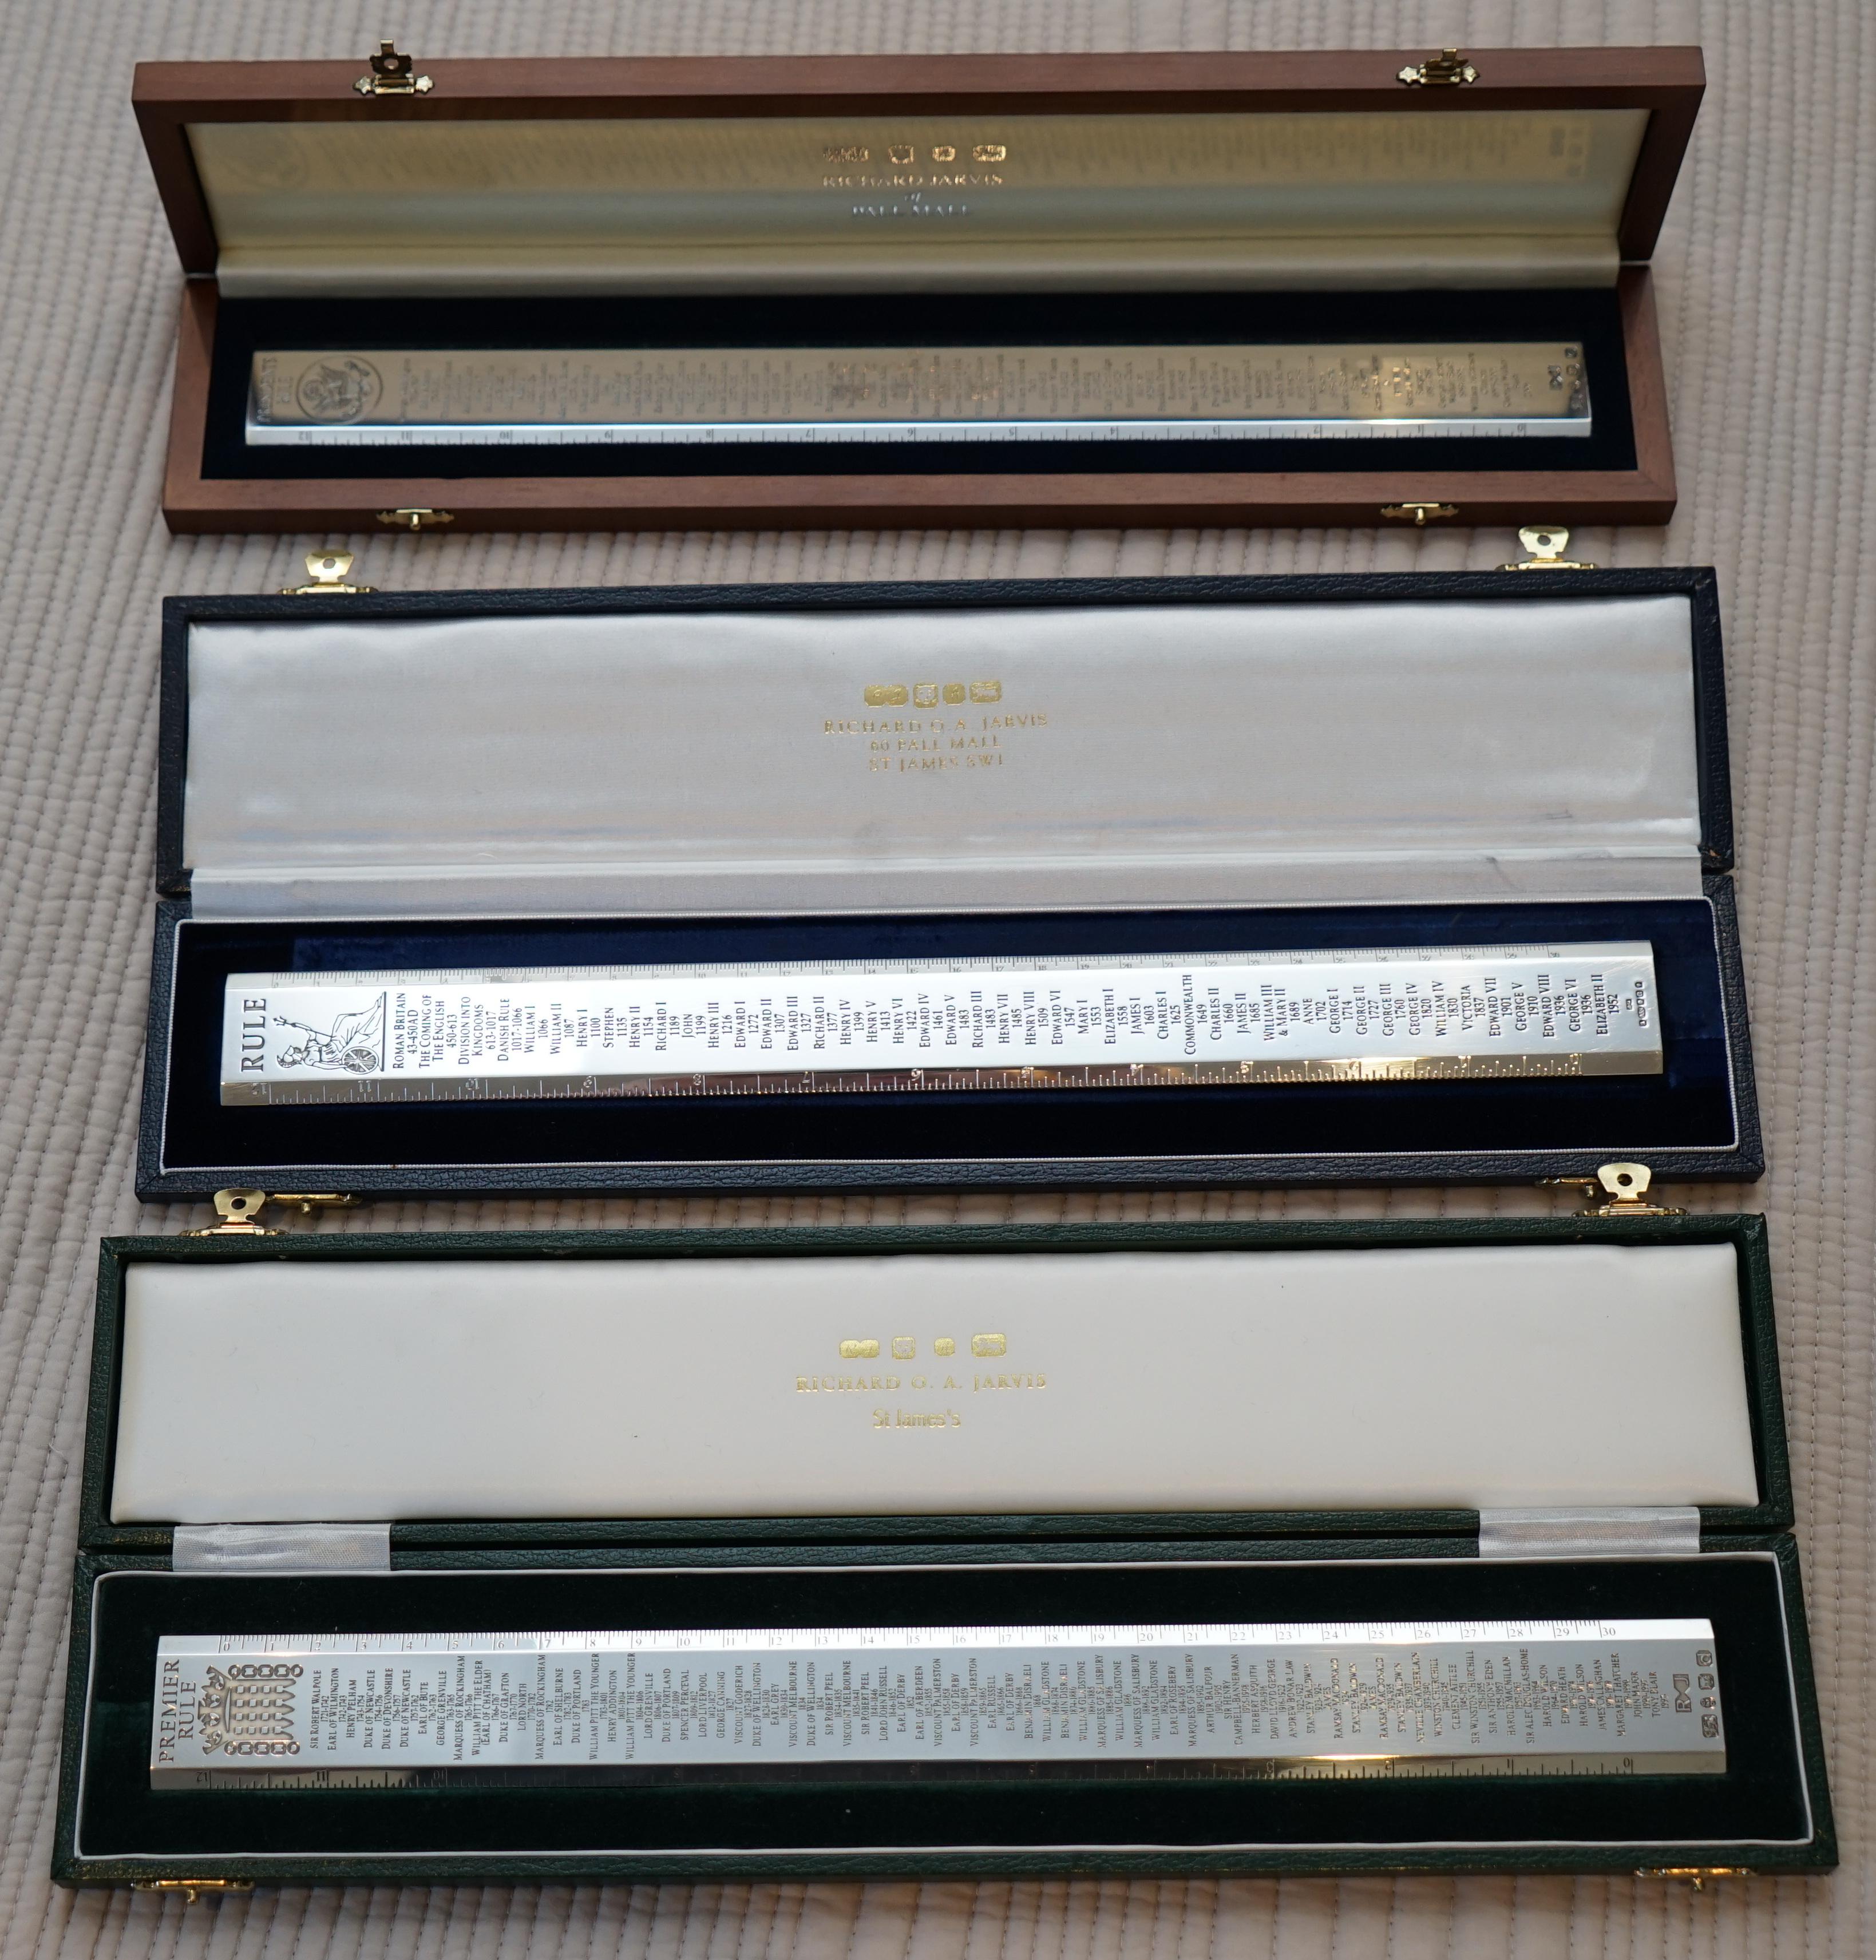 We are delighted to offer for sale this stunning Limited Edition of 500 Richard Jarvis of Pall Mall RRP £1100 Britannia Pure Silver Premier Rule engraved with all the Prime Ministers from Sir Robert Walpole 1721 up until Tony Blair 2001.

I have